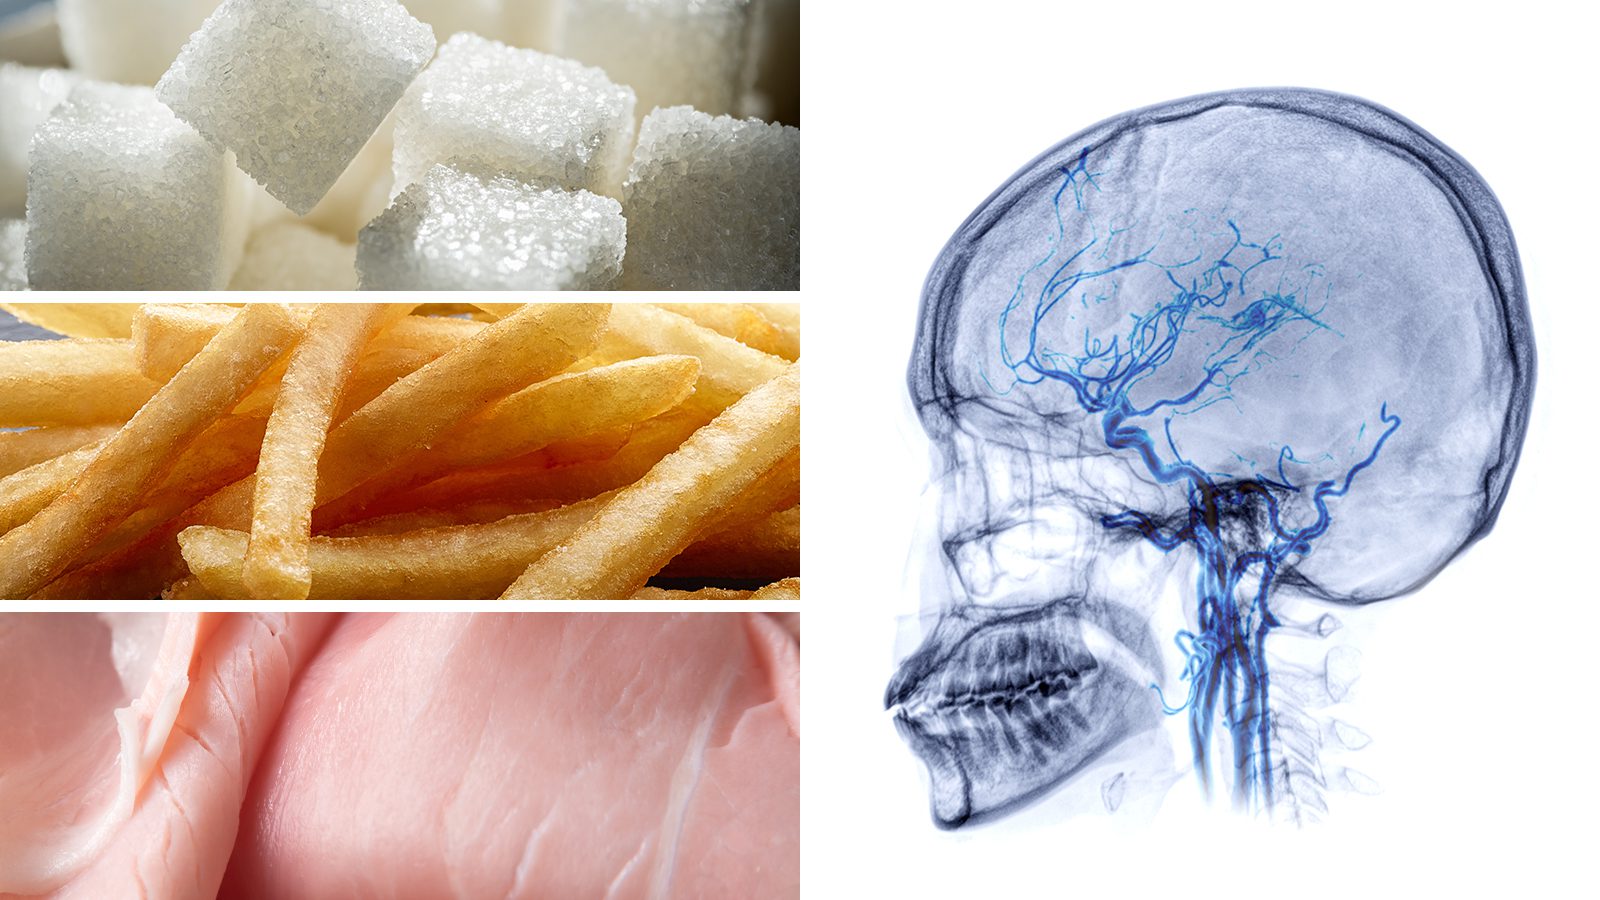 Neurologists Explain 10 Foods That Are Bad for Brain Health